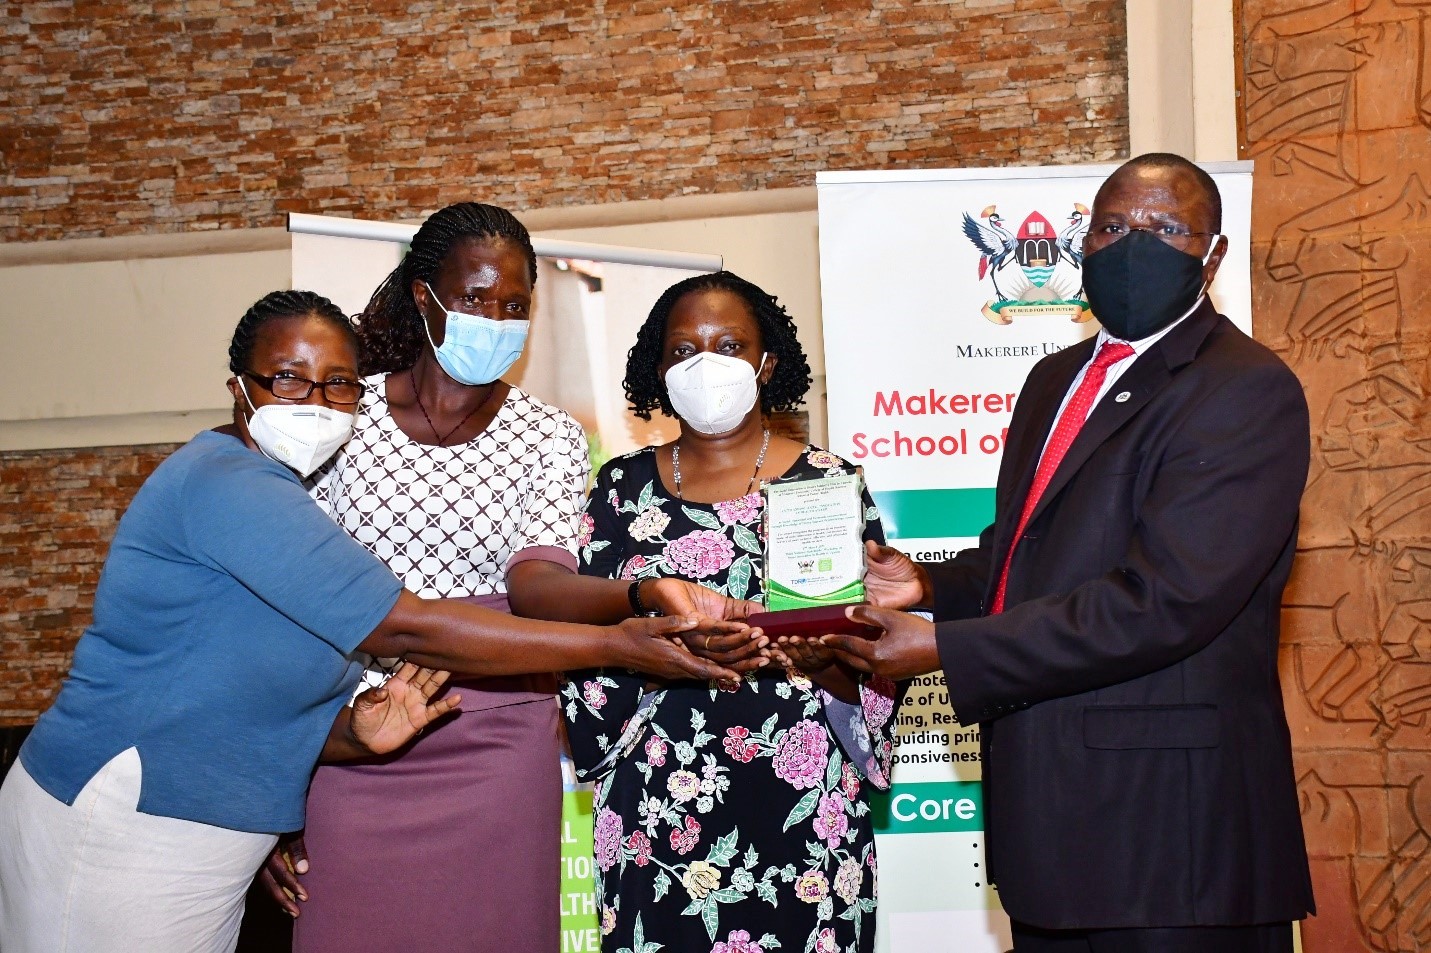 Dr. Maxwell Otim Onapa, the Director of Science, Research and Innovation at Ministry of Science, Technology and Innovation (R) hands over a plaque to Dr. Etheldreda Nakimuli (2nd R) and her team at SEEK-GSP project. Their project aimed at narrowing the treatment gap for depression among people living with HIV using group support psychotherapy delivered by community health workers. They are among the winners of the 2020 Social Innovations in Health Awards organized by the School of Public Health on 17th March 2021.